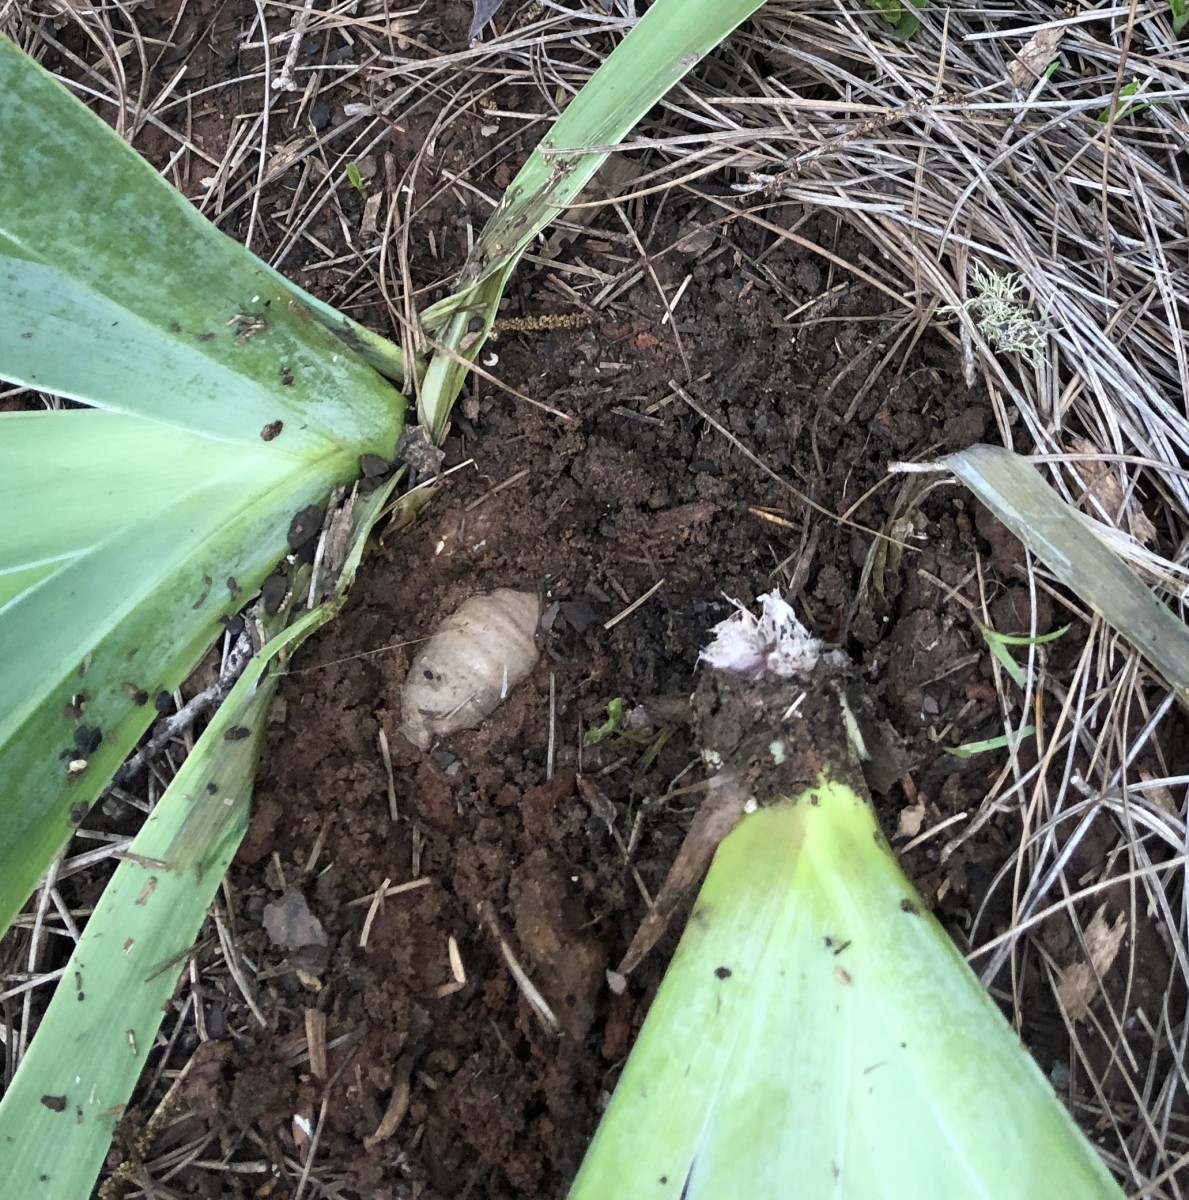 This is one in a bed or irises that had soil washed over them by heavy rains. The white material of rot can be seen on the part on the right. The main rhizome (on the left) is almost buried, too. I quickly moved all the plants to an area with better 